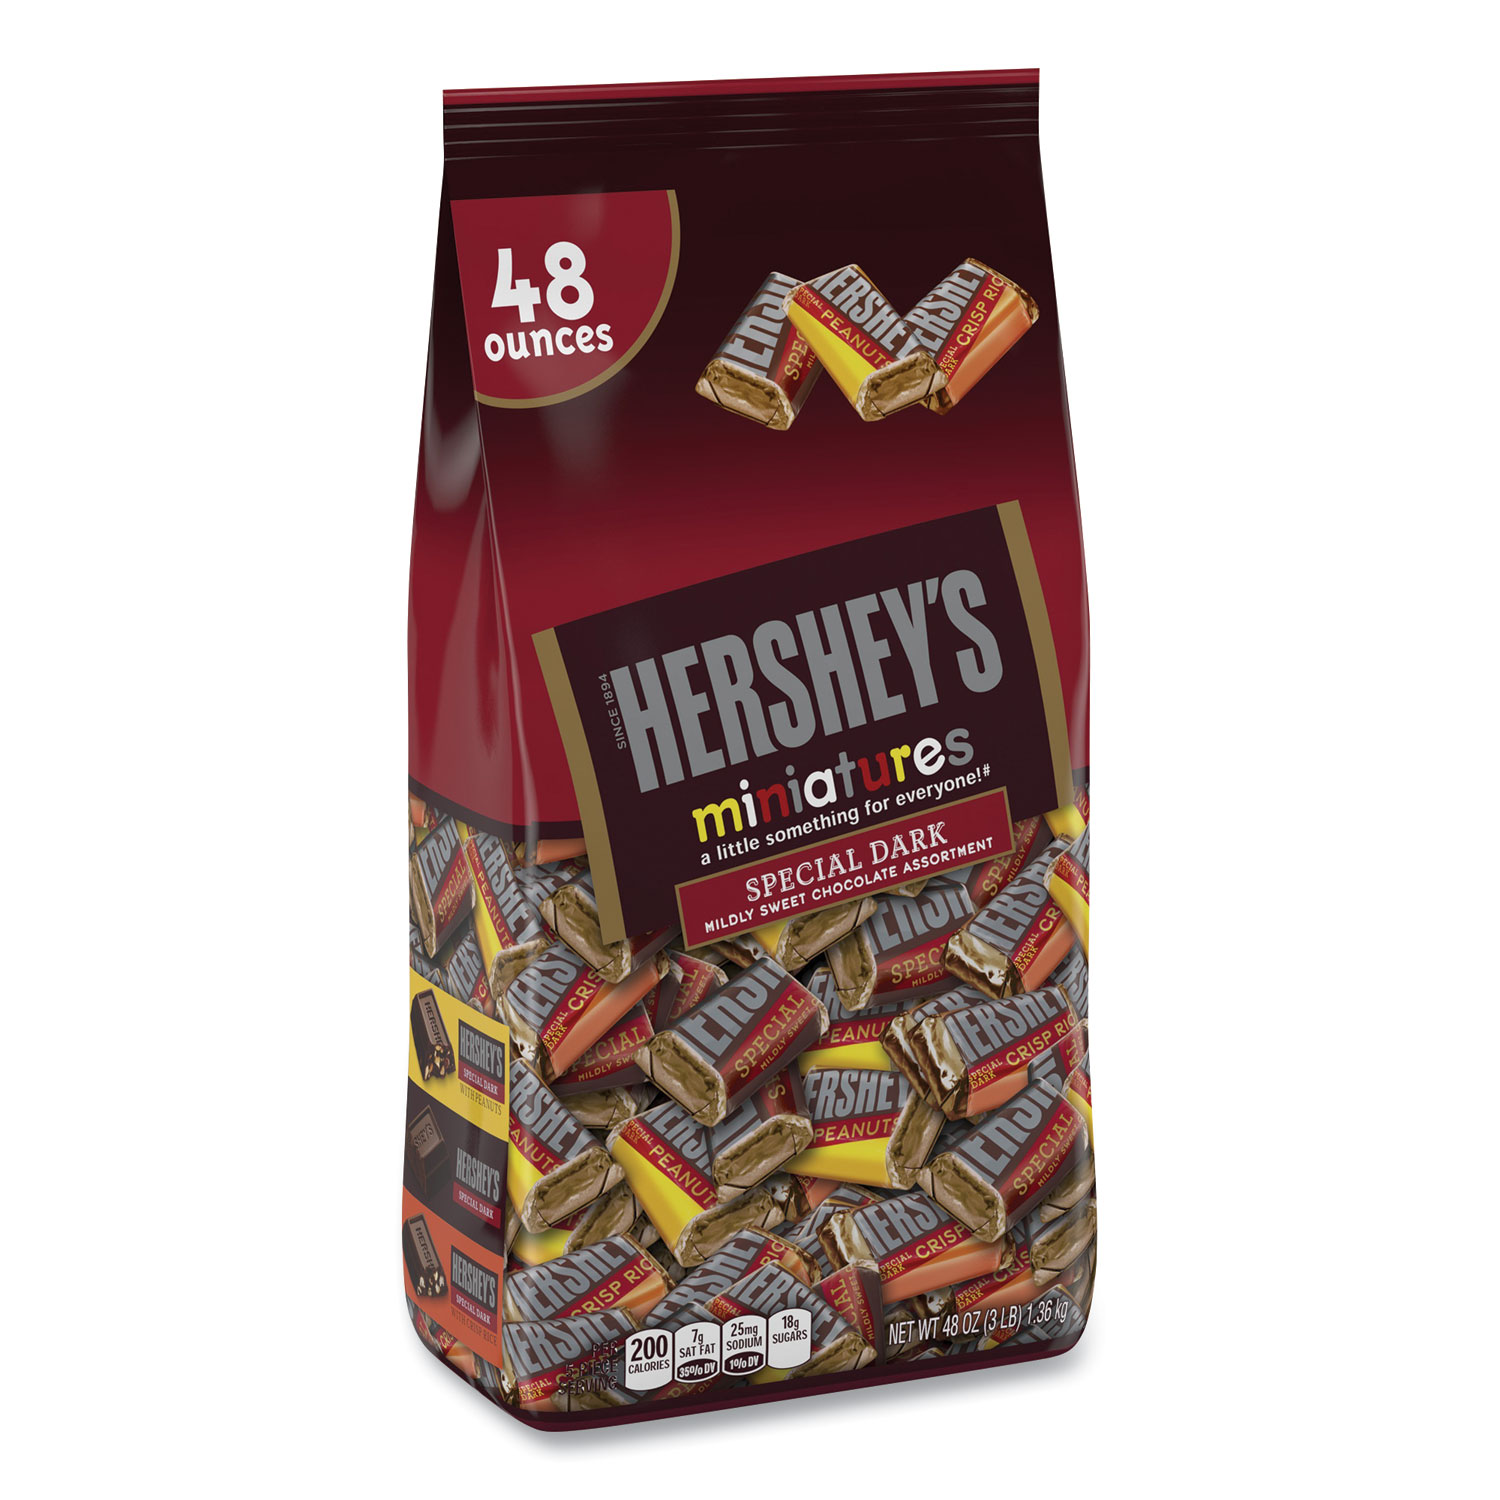  Hershey's 18916 Miniatures Variety Share Pack, Dark Assortment, 48 oz Bag, Free Delivery in 1-4 Business Days (GRR20900314) 